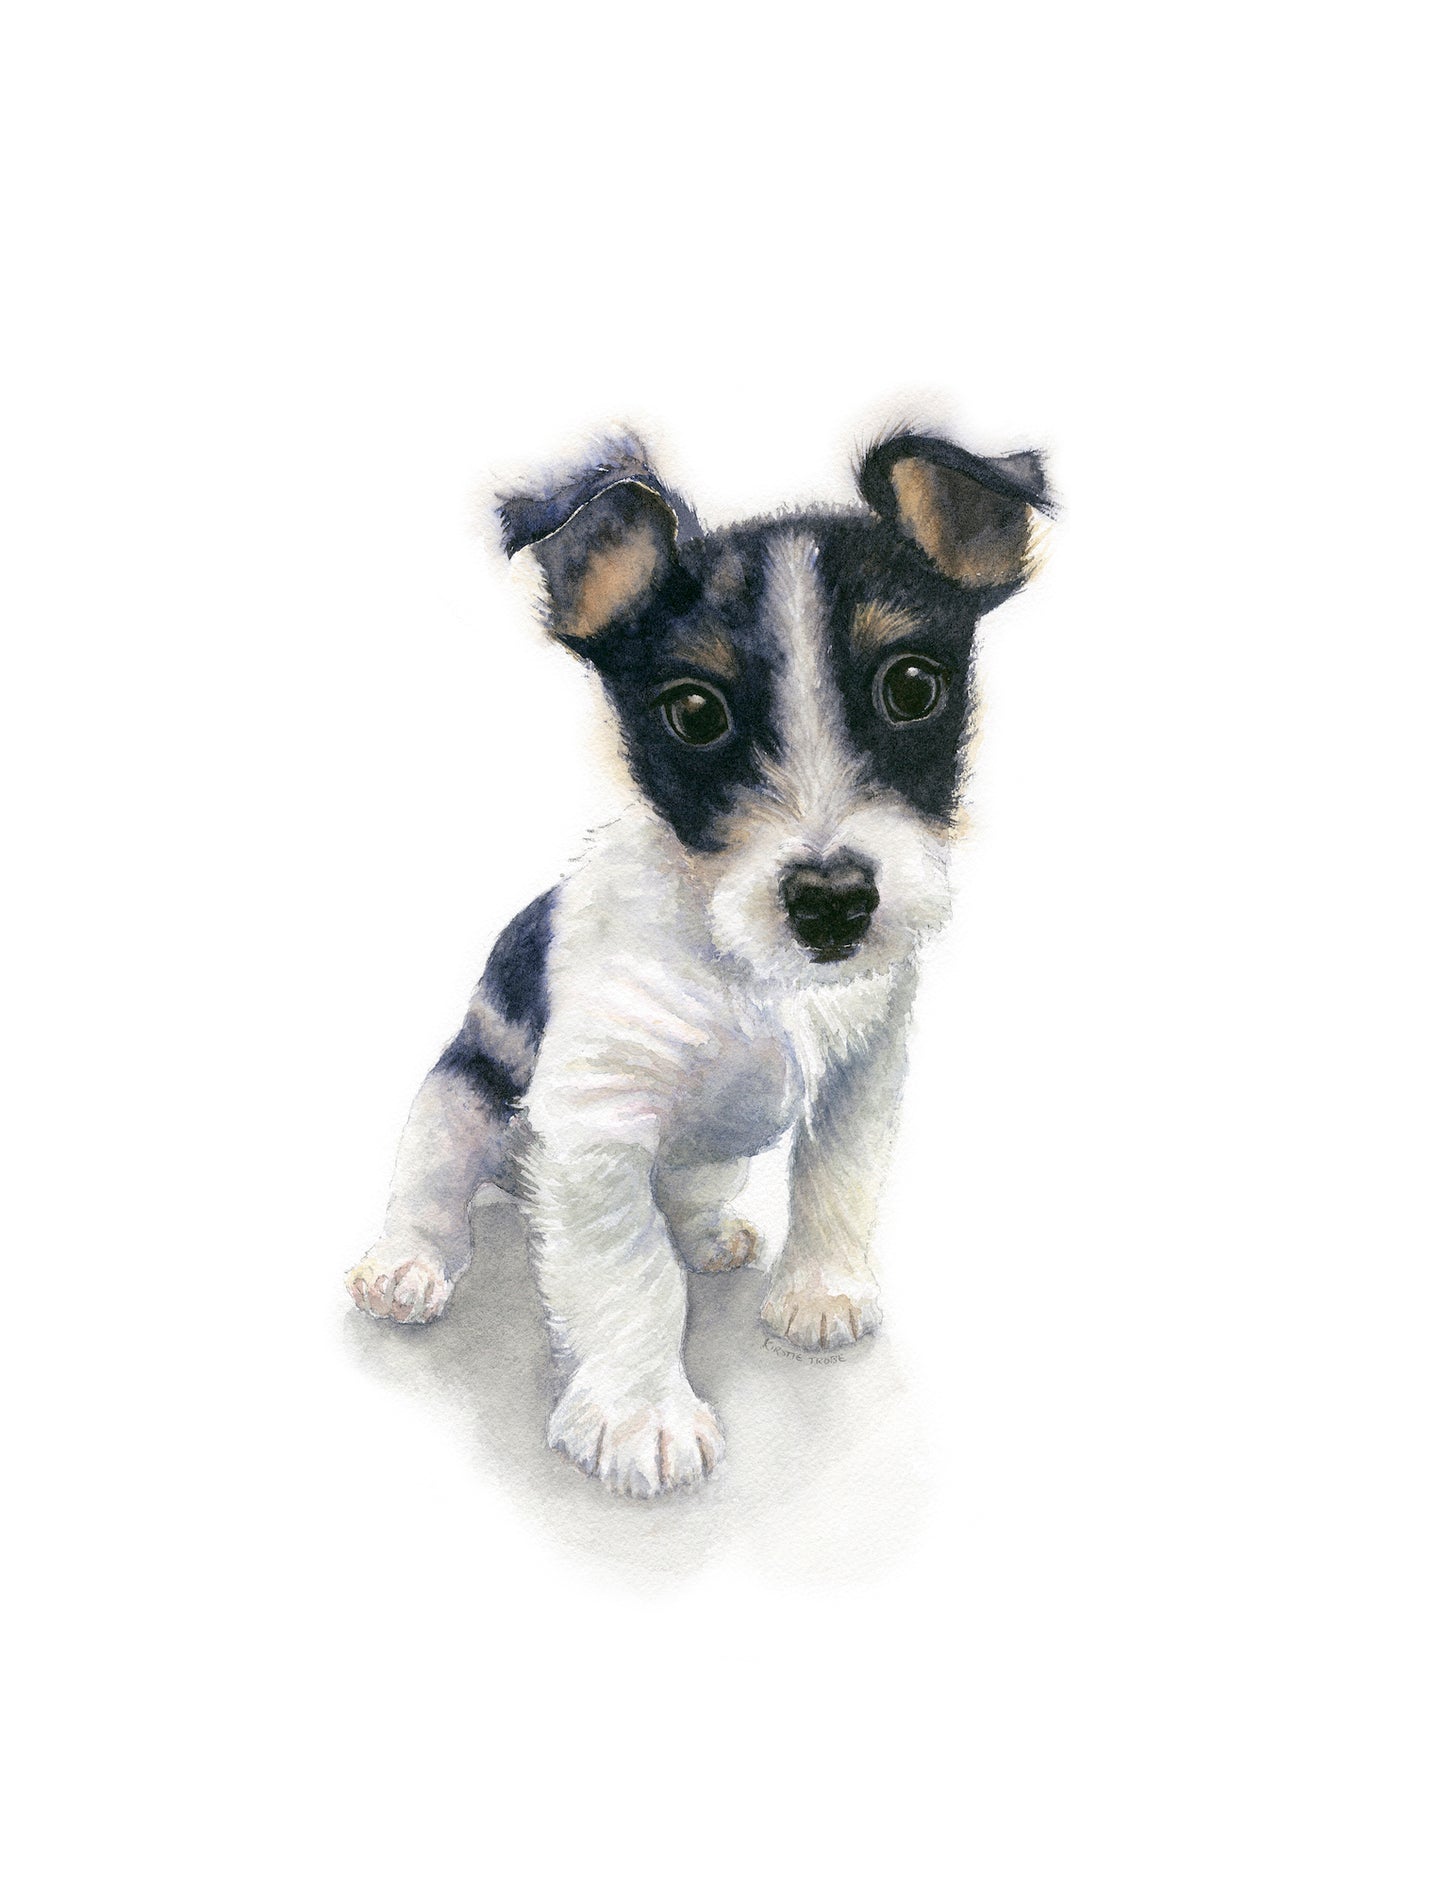 Abandoned Puppy. Image of a cute abandoned Jack Russell puppy staring imploringly out at the viewer. Centrally positioned against a white background. The puppy has a white body with black and tan markings and soft tufts of wiry fur around his muzzle and ears. The original painting will fit a 20 x 16 inch frame when mounted.